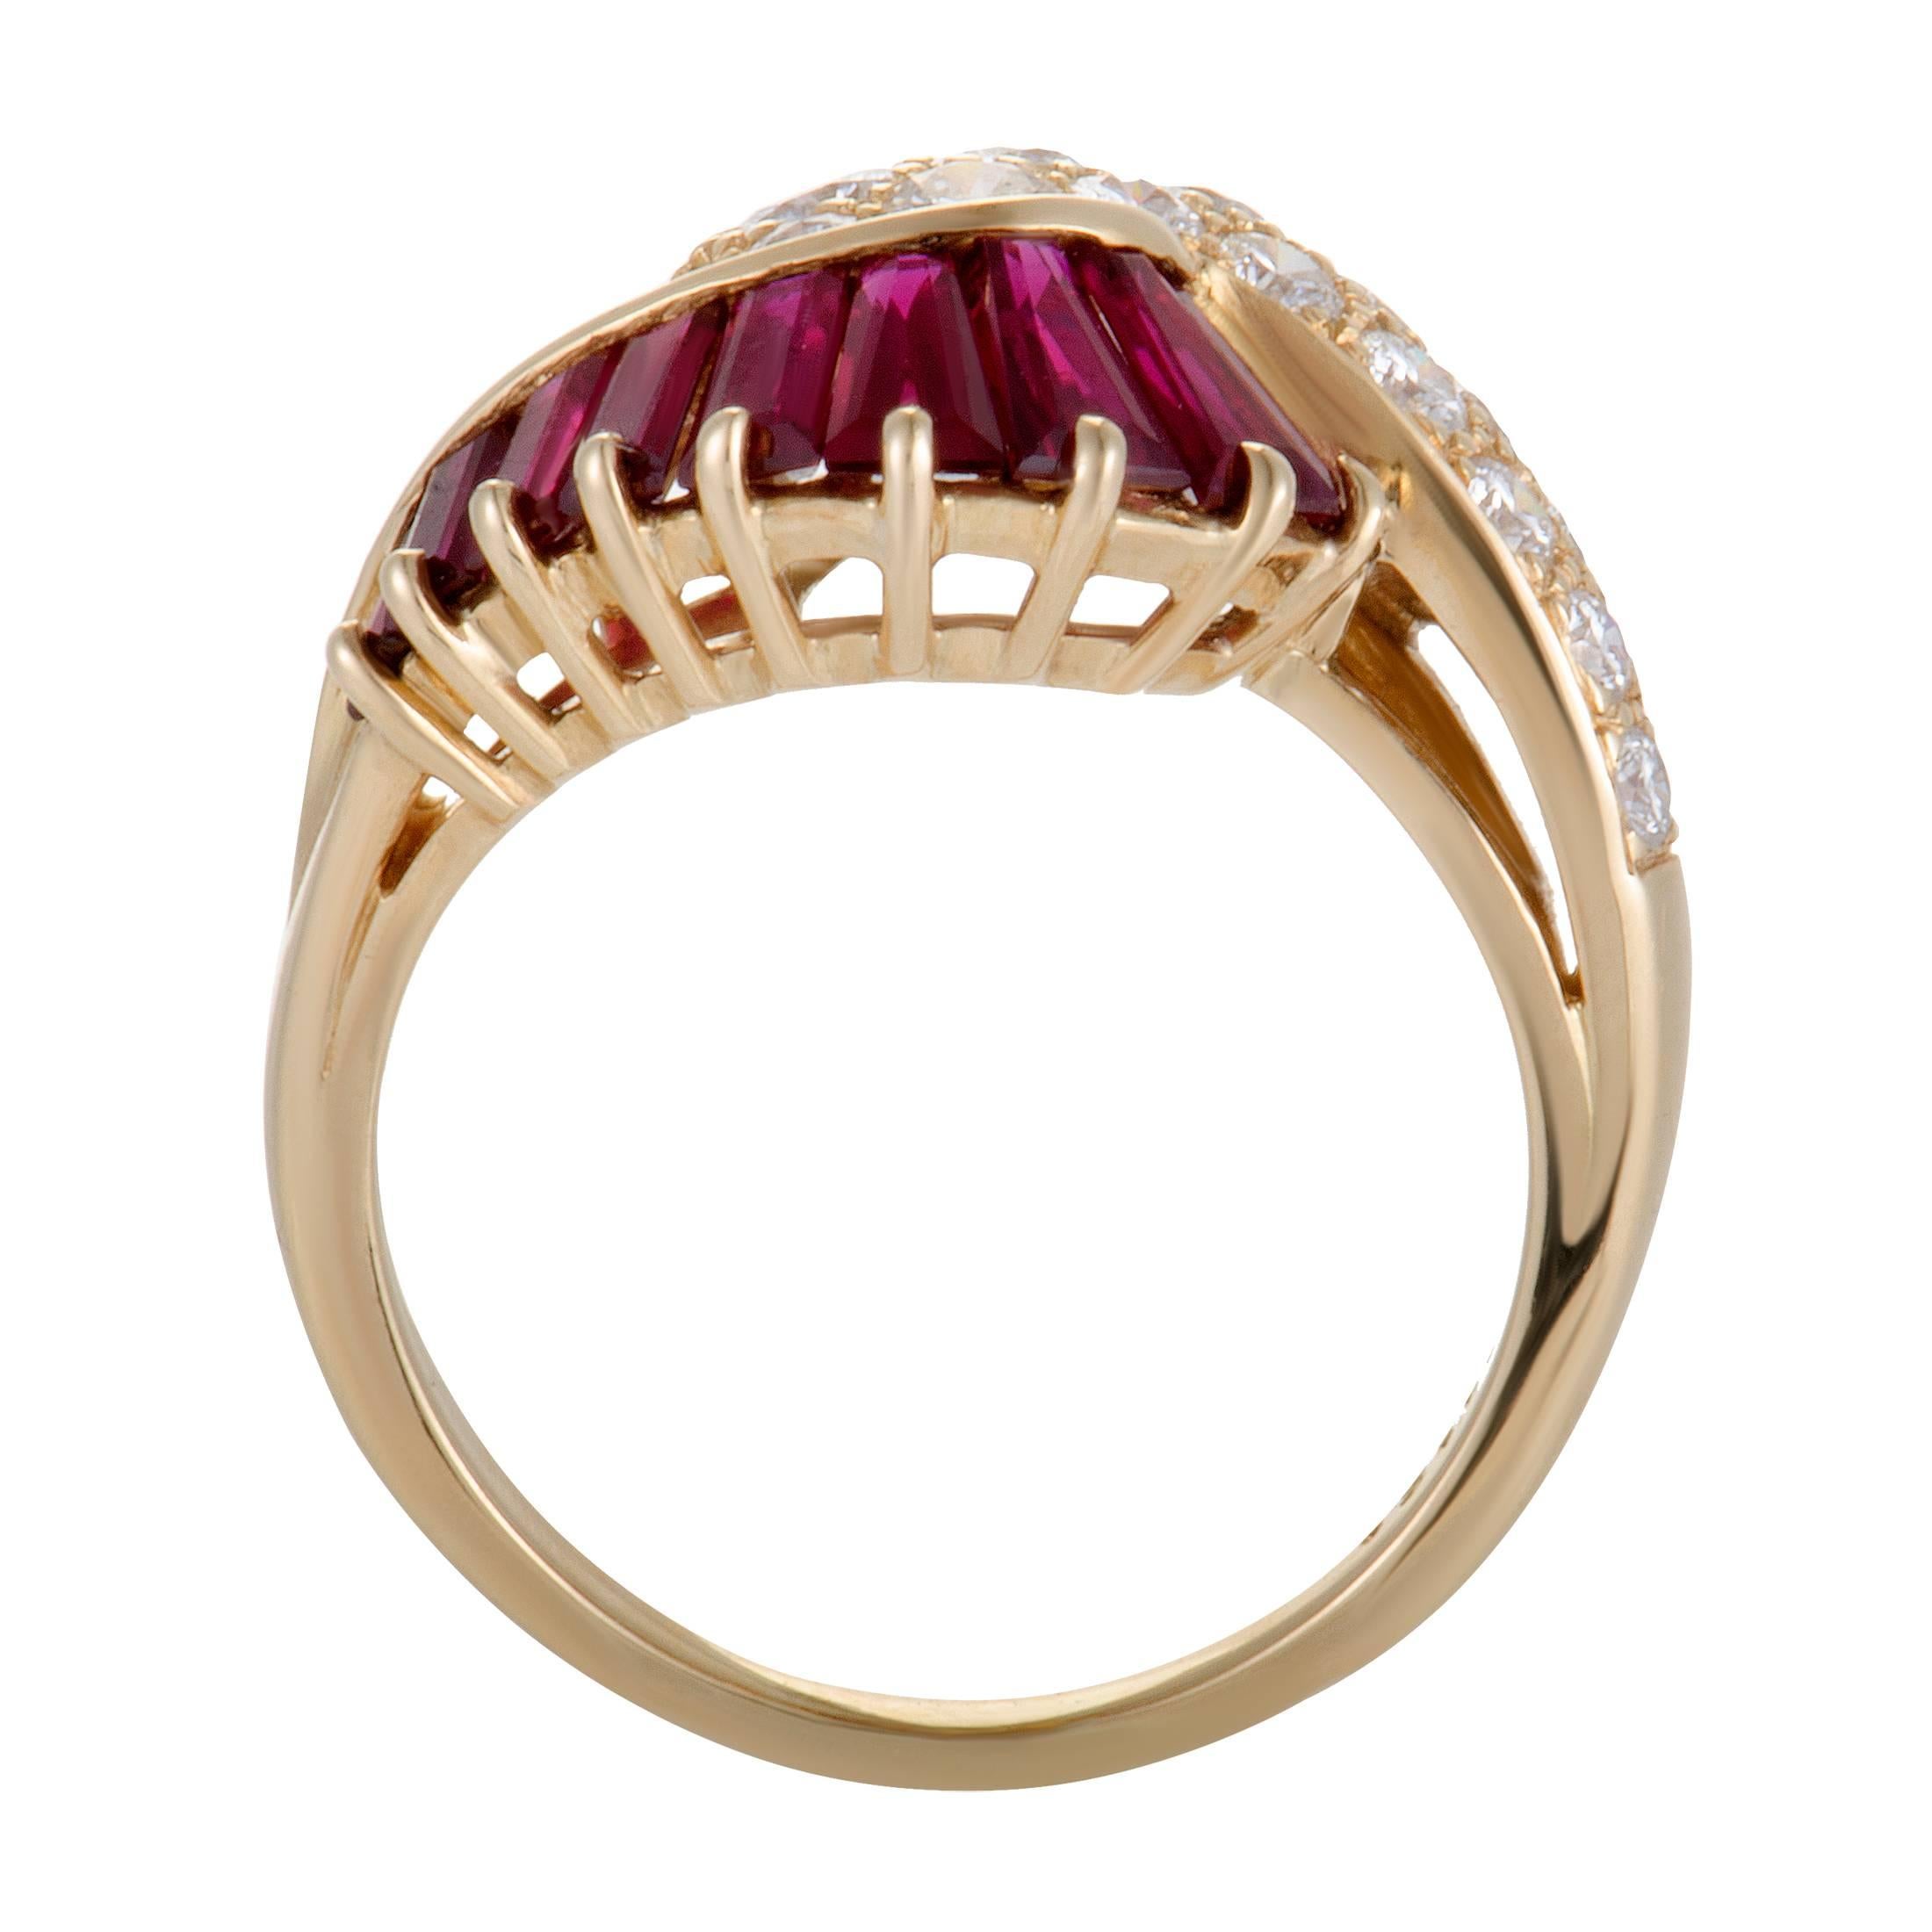 Beauty and glam are eminent in this phenomenal 18K yellow gold ring by Oscar Heyman. Its fabulous design has a row of sparkling F-color, VVS-clarity 1.20ct diamonds that meet a row of precious invisible set rubies weighing in total 1.60ct. Together